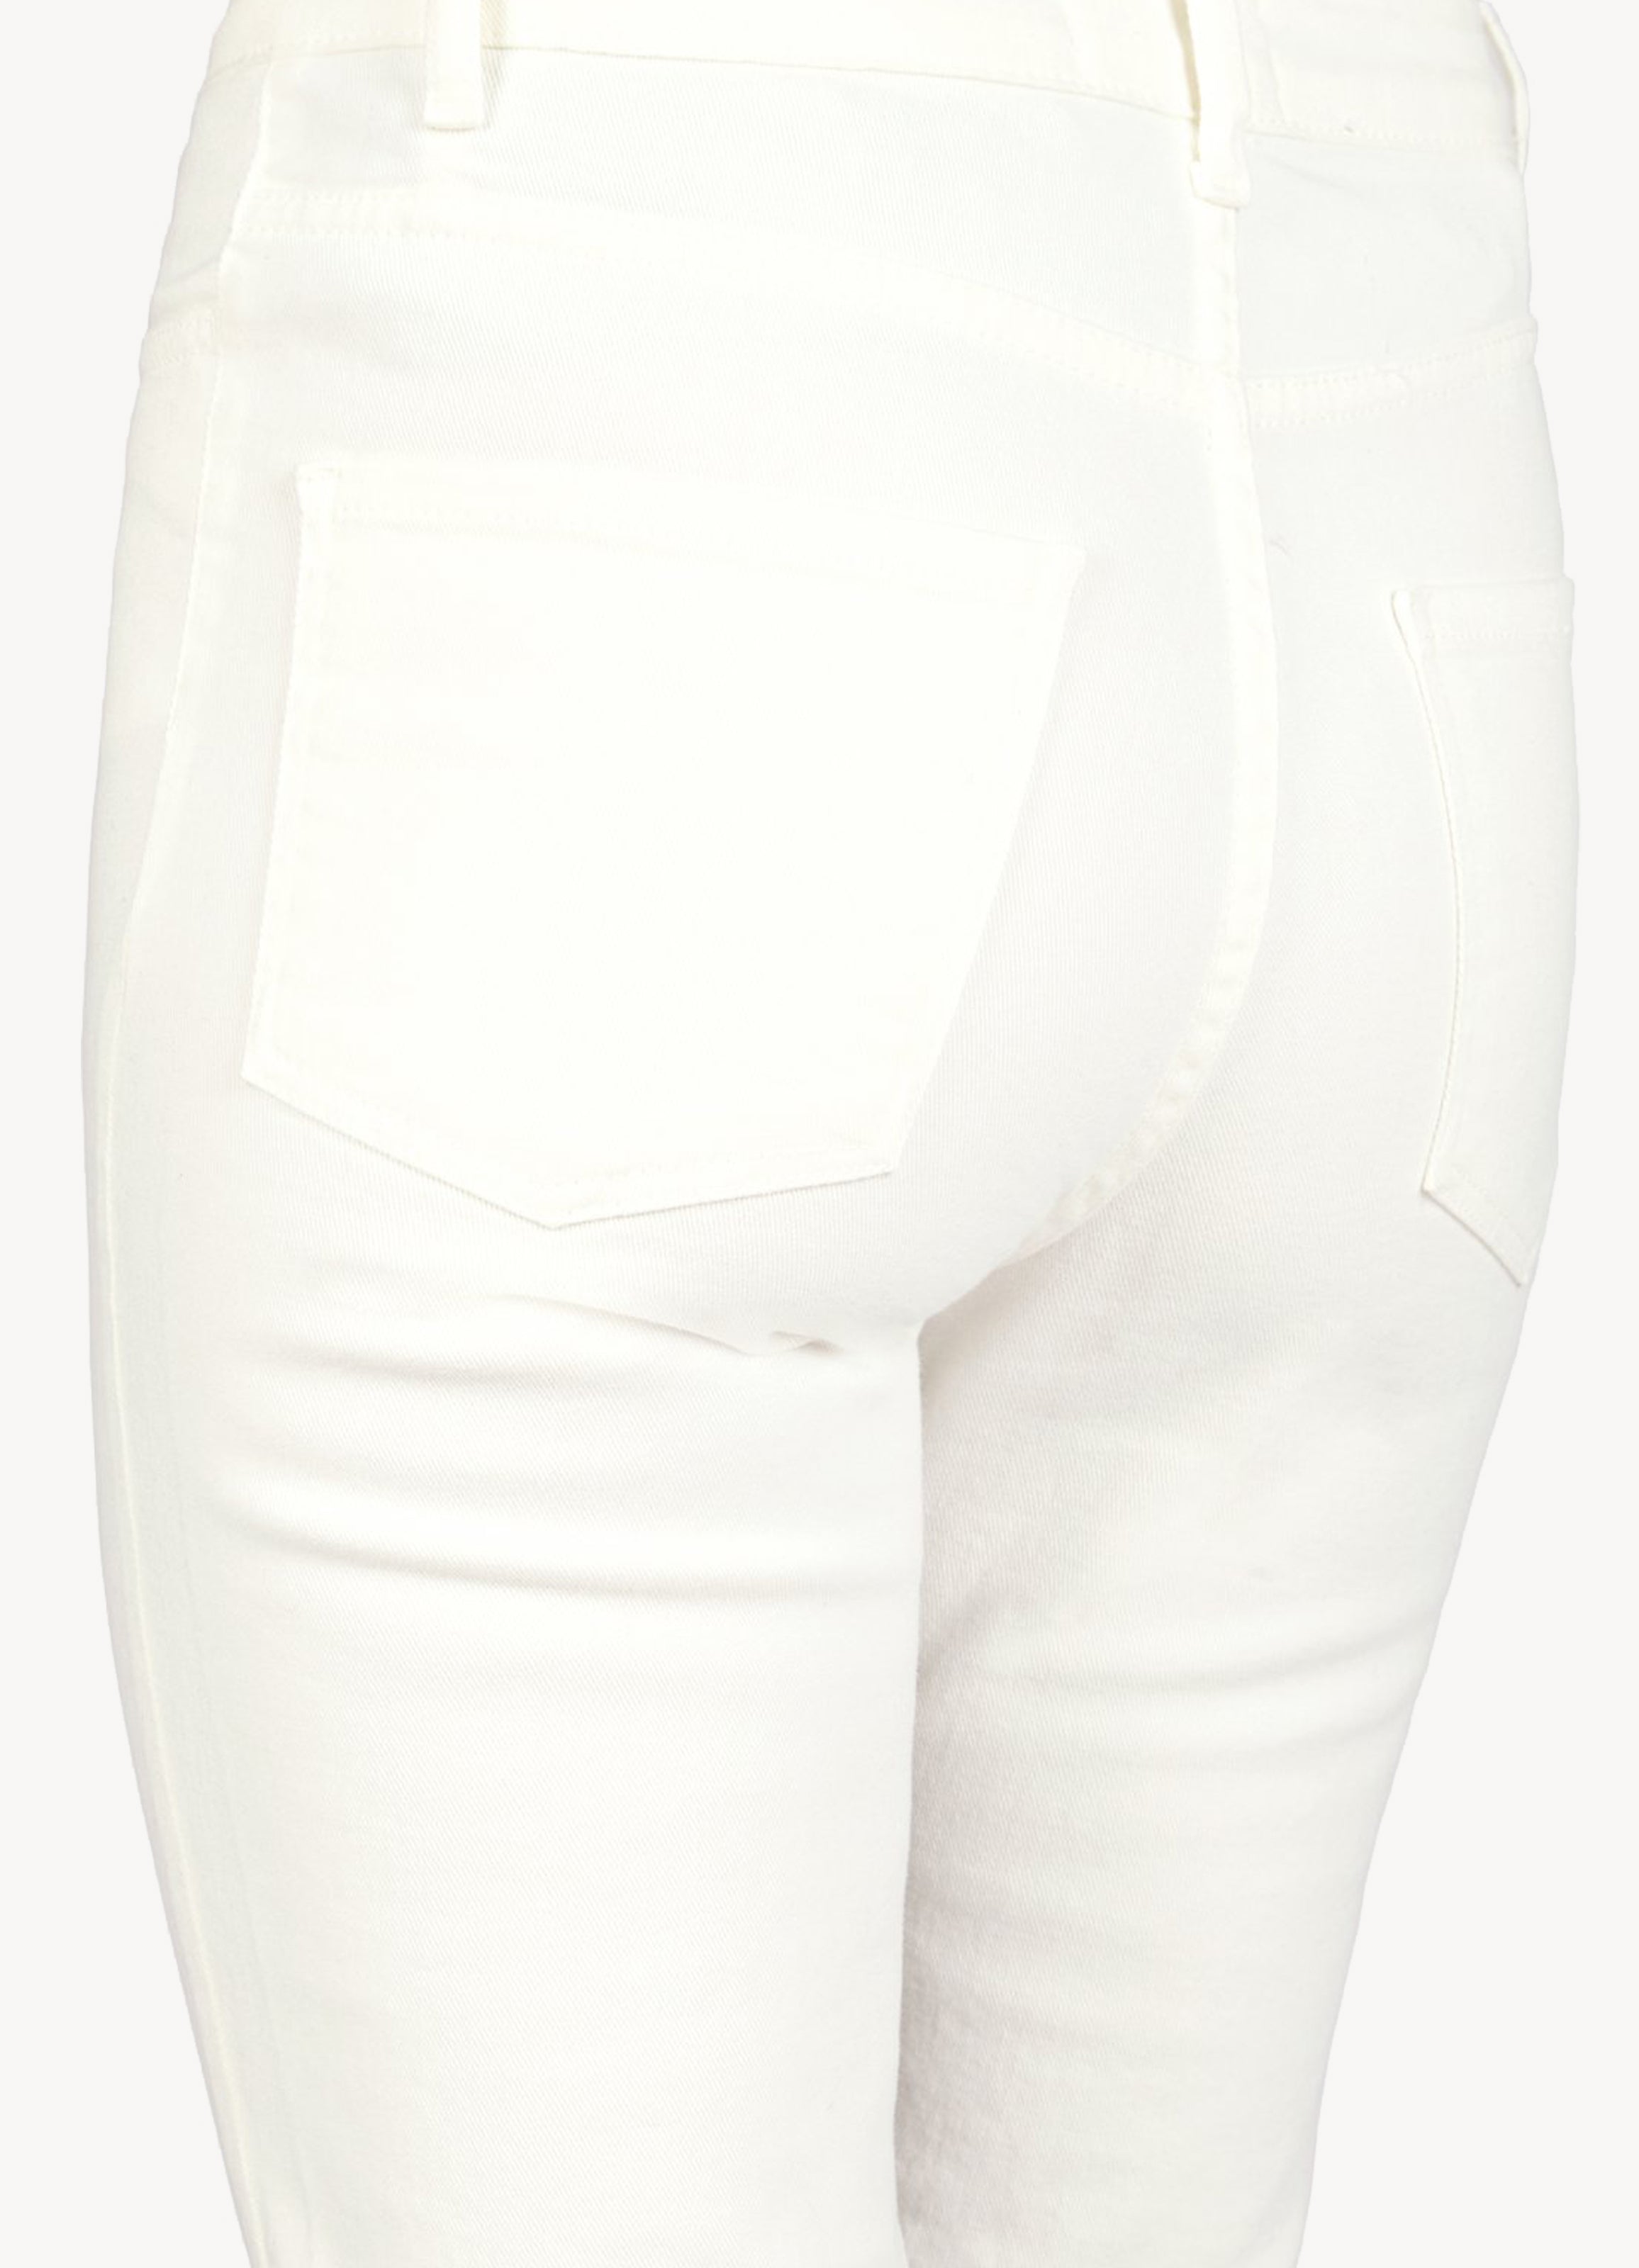 BC5 Off-White High-Waist Slim Cropped Jeans